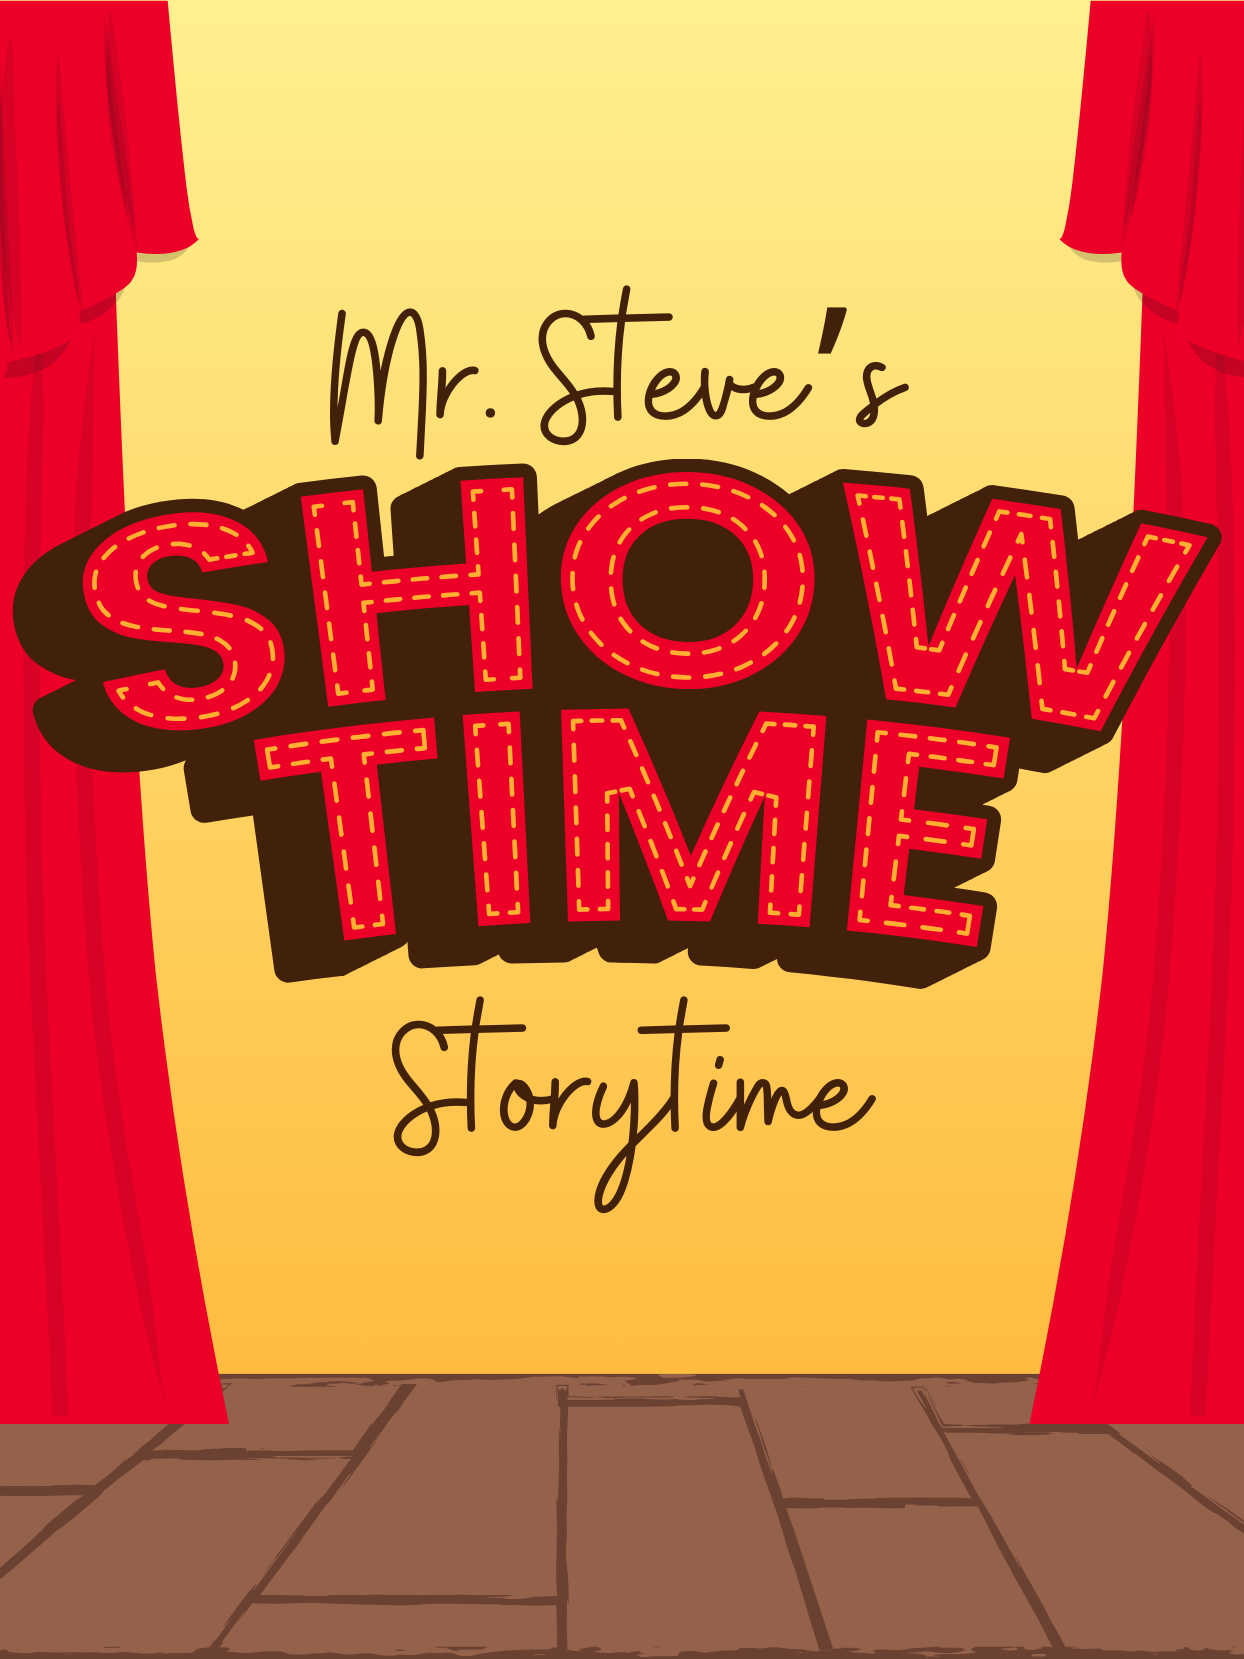 red curtain with yellow background. text reads "mr. Steve's showtime storytime"